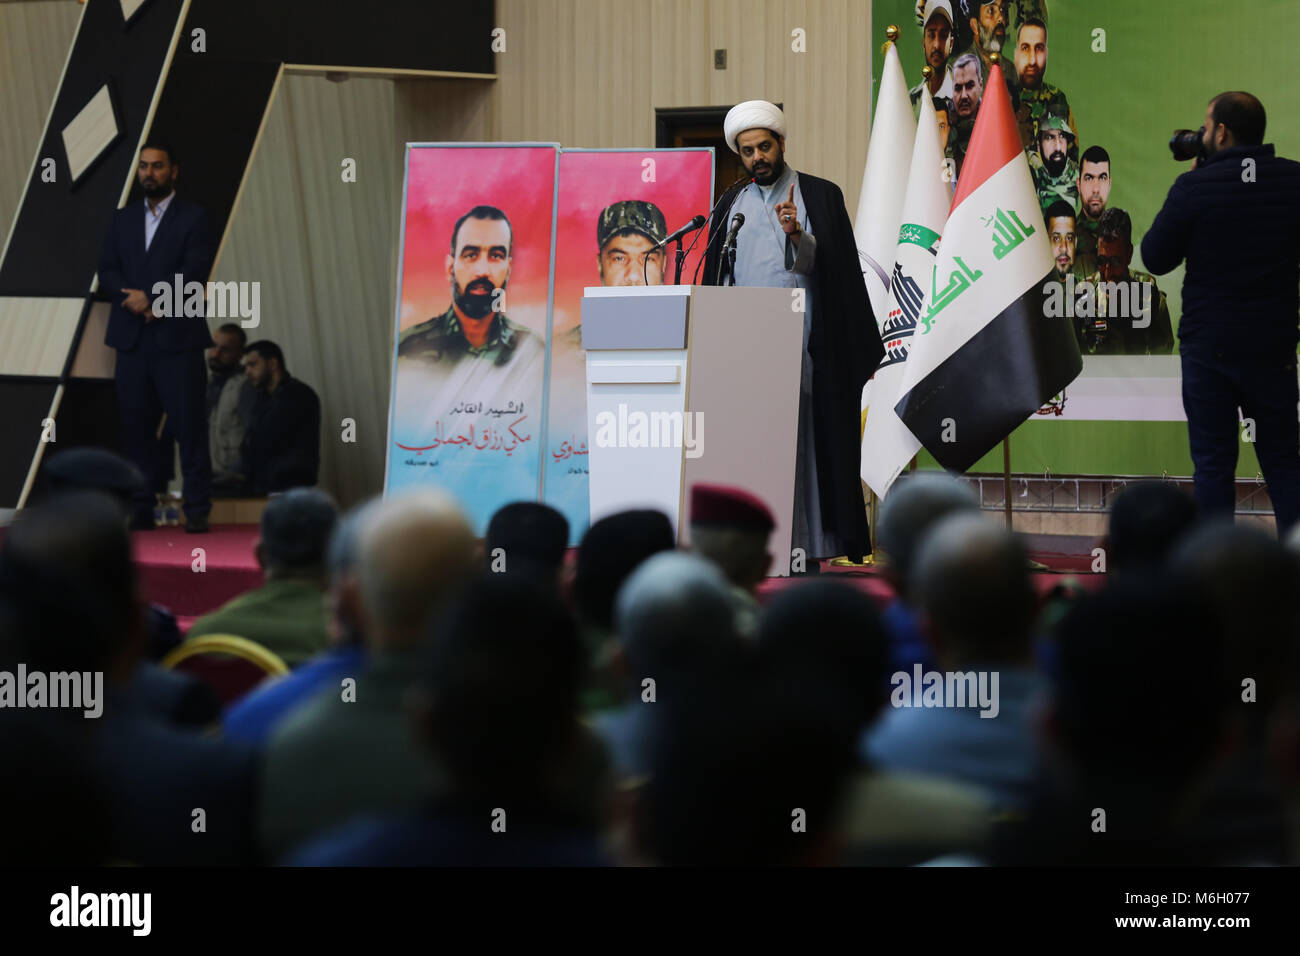 March 3, 2018 - A conference is held in Baghdad to commemorate three years since the recapture of Tikrit from the Islamic State. The conference was attended by the Iraqi Interior Minister, by the commander of the Popular Mobilisation Forces (PMF), Abu Mahdi al-Muhandis, and by the leader of the Credit: ZUMA Press, Inc./Alamy Live News Stock Photo